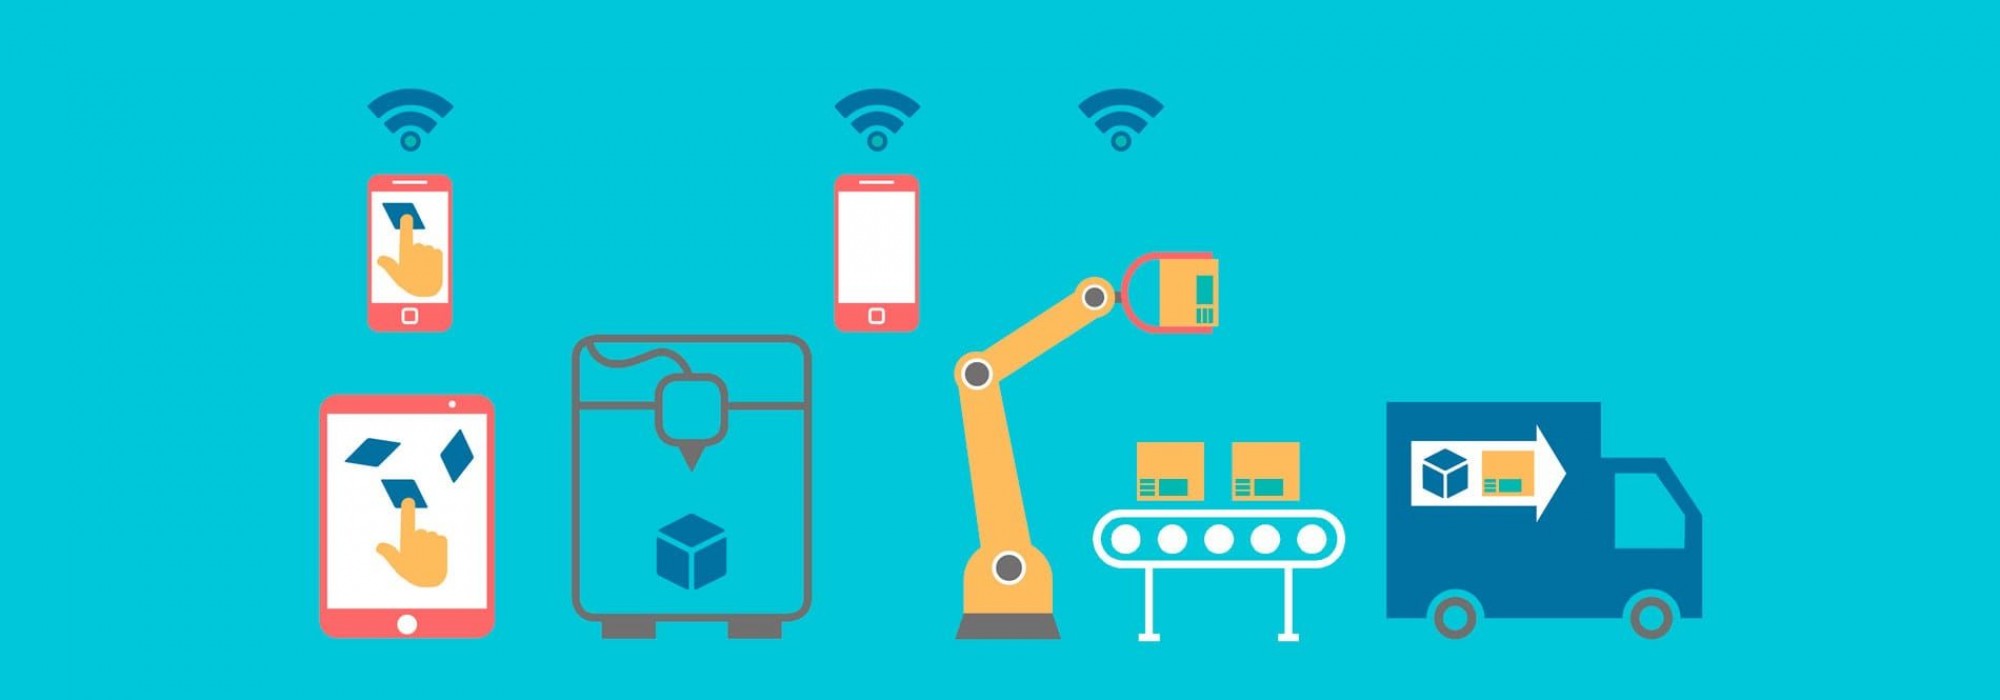 Get inspired by the new IoT cases